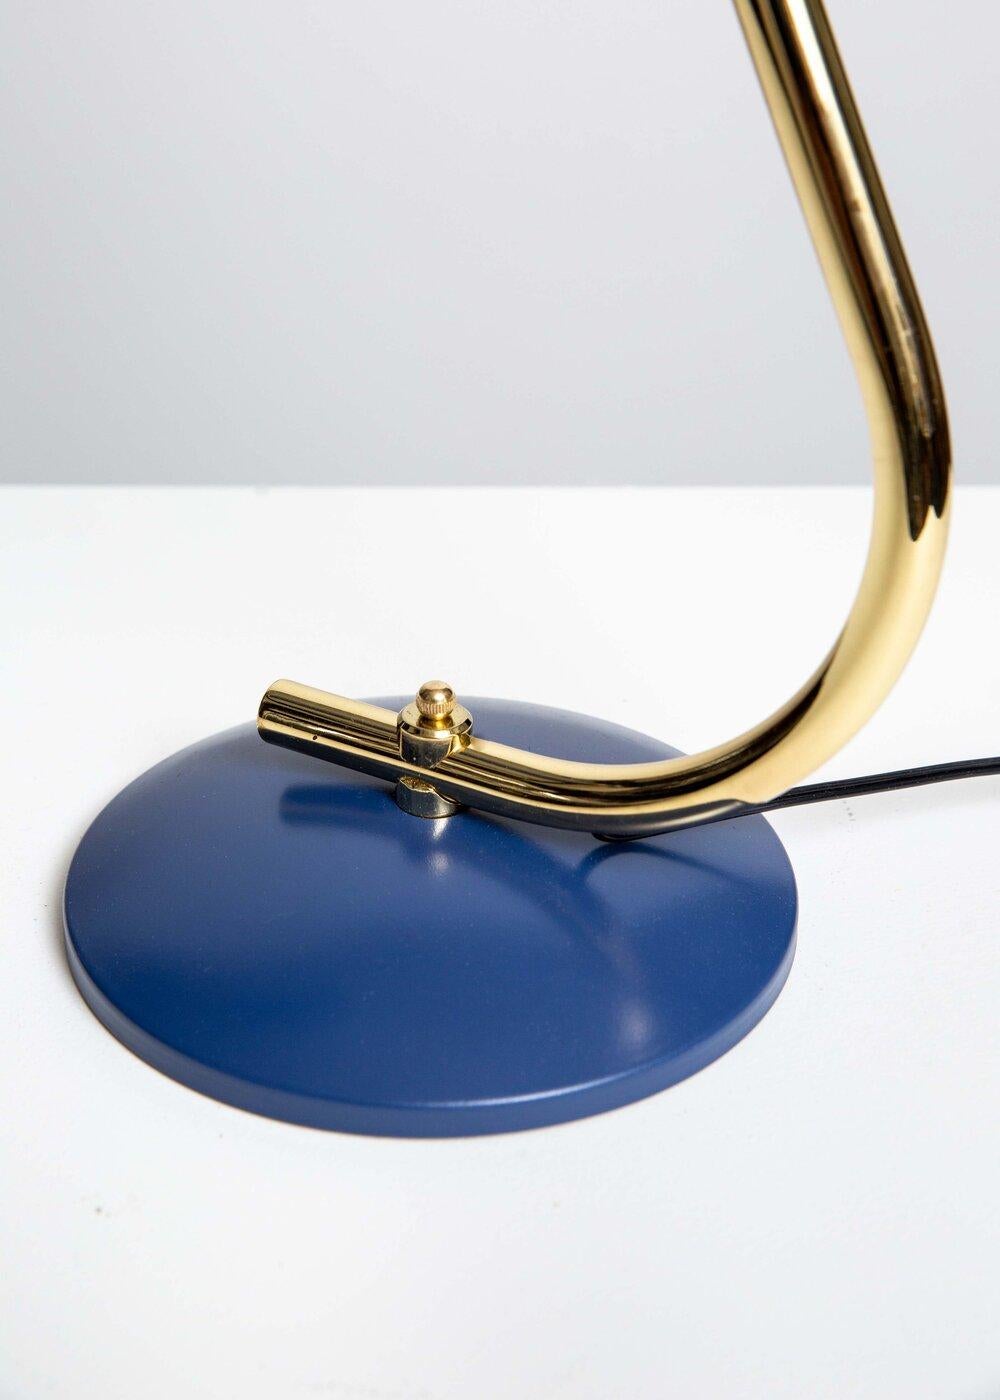 Plated Jacques Biny Attributed Jupiter Desk Lamp for Aluminor For Sale